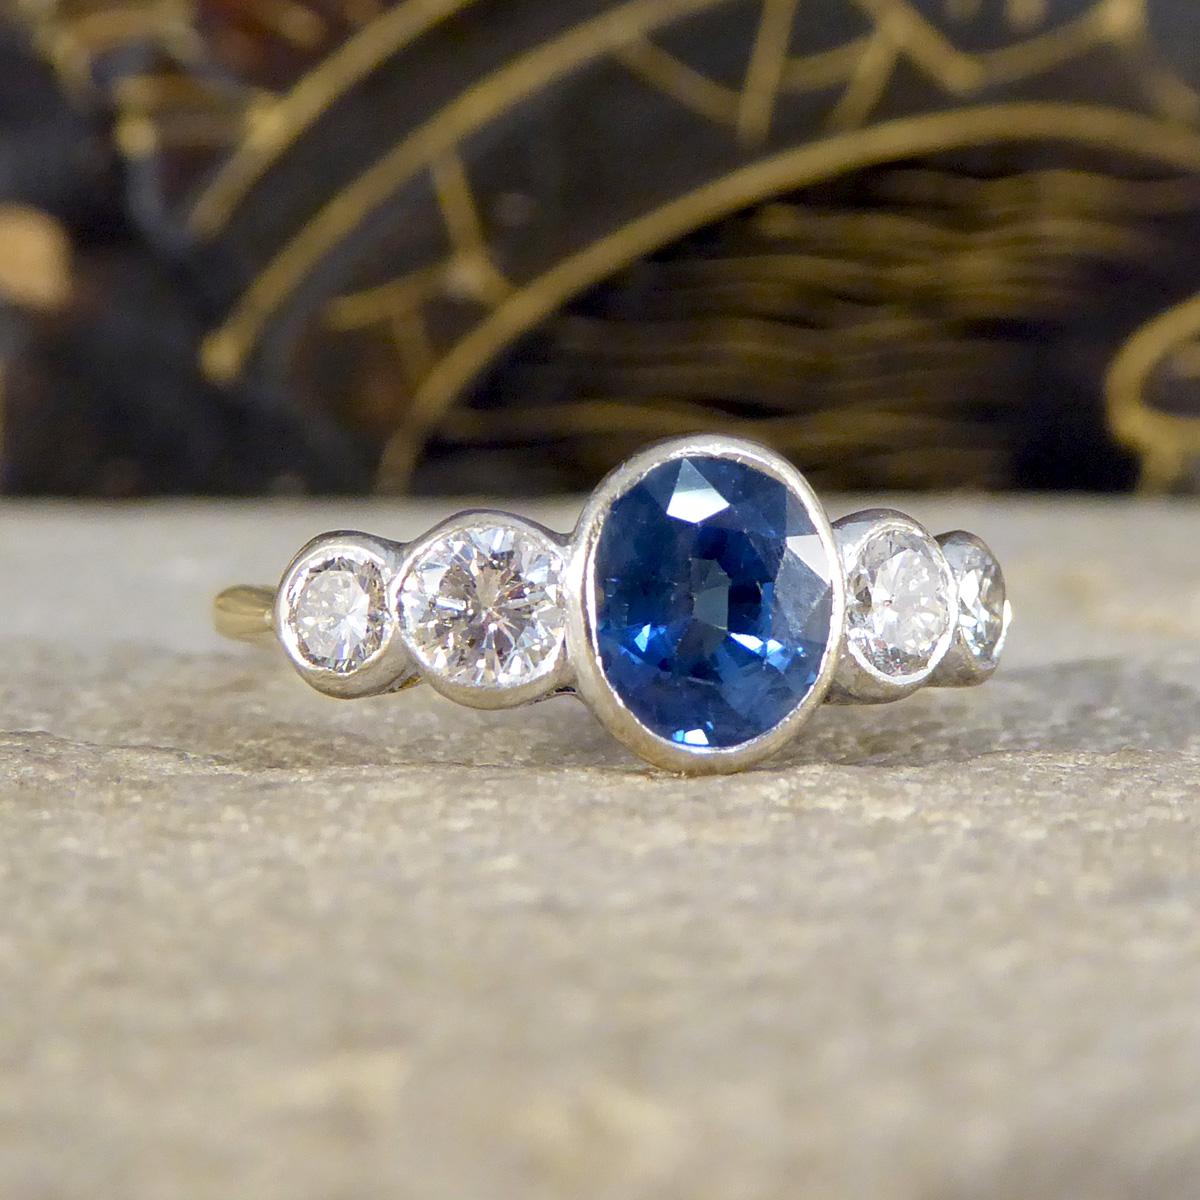 This Edwardian Sapphire and Diamond bezel set five stone ring is a testament to early 20th-century elegance. Crafted in 18ct white and yellow gold, it features a harmonious blend of one single deep blue sapphire in the centre weighing approximately